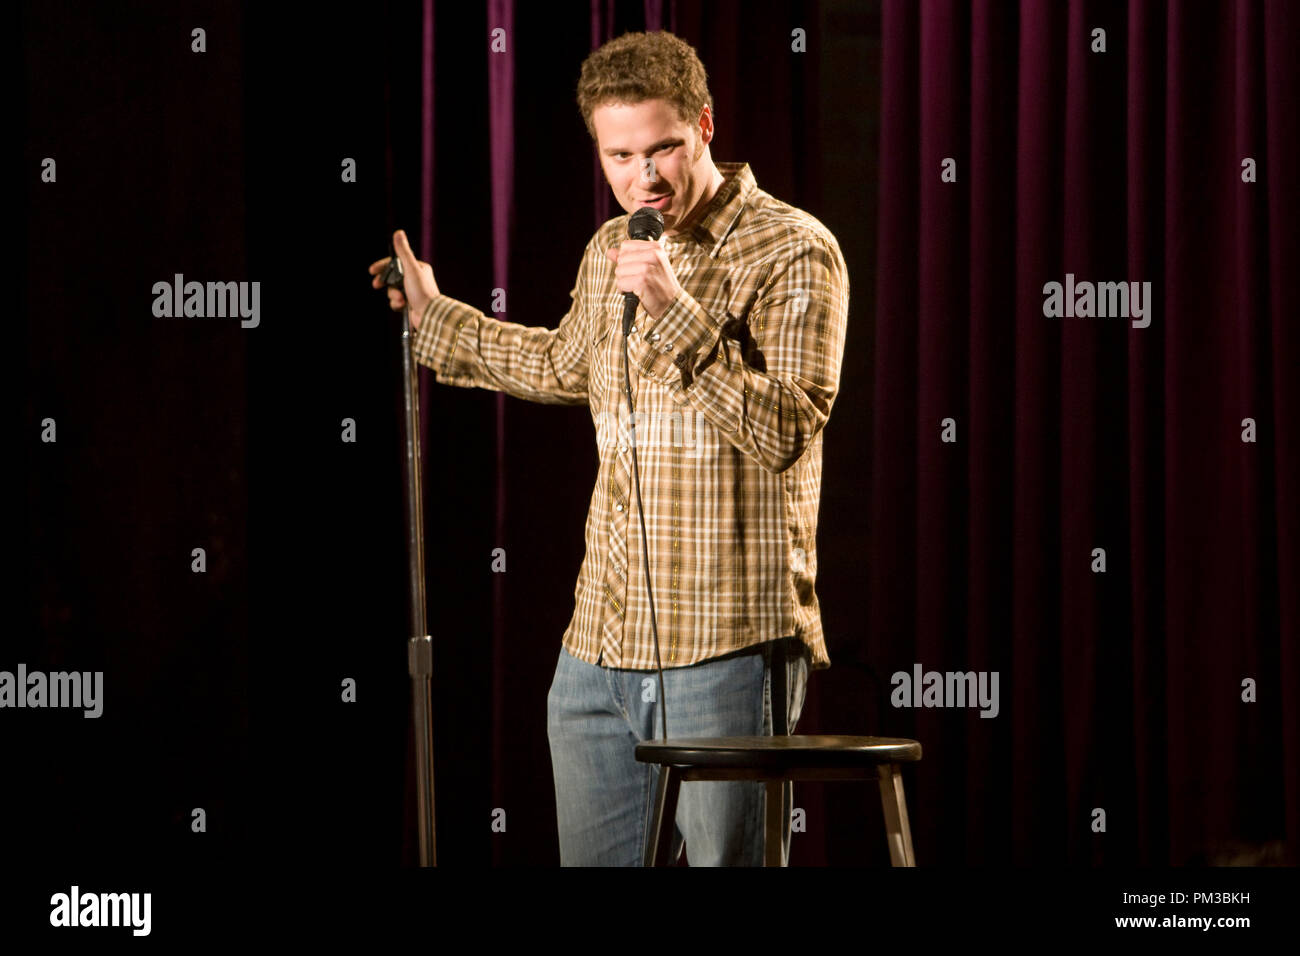 Seth Rogen in Universal Pictures' "Funny People" 2009. Stockfoto